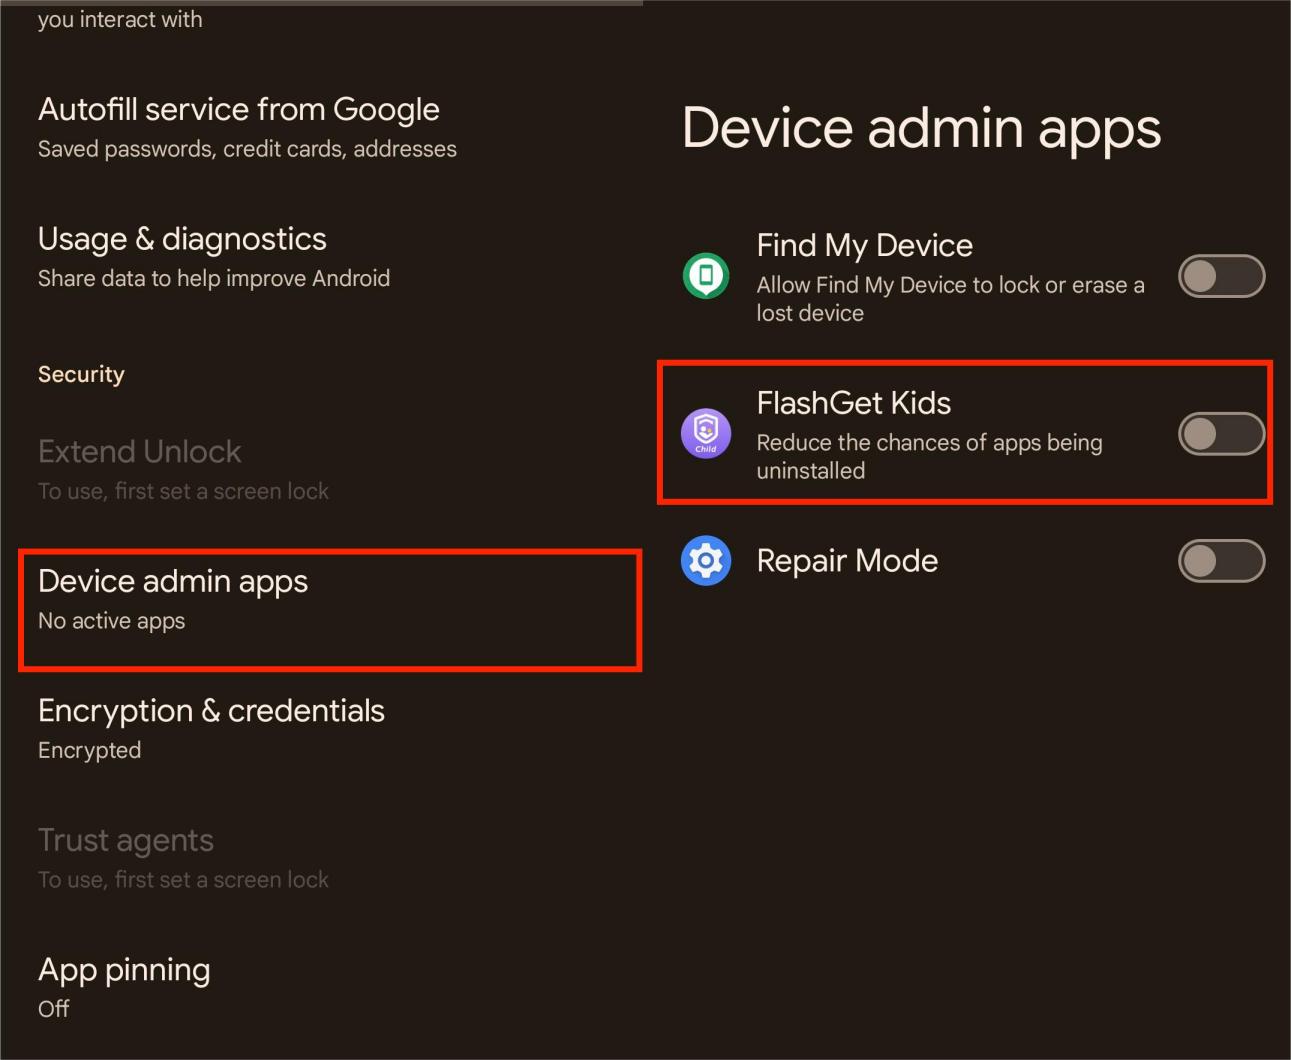 Tap Device admin apps